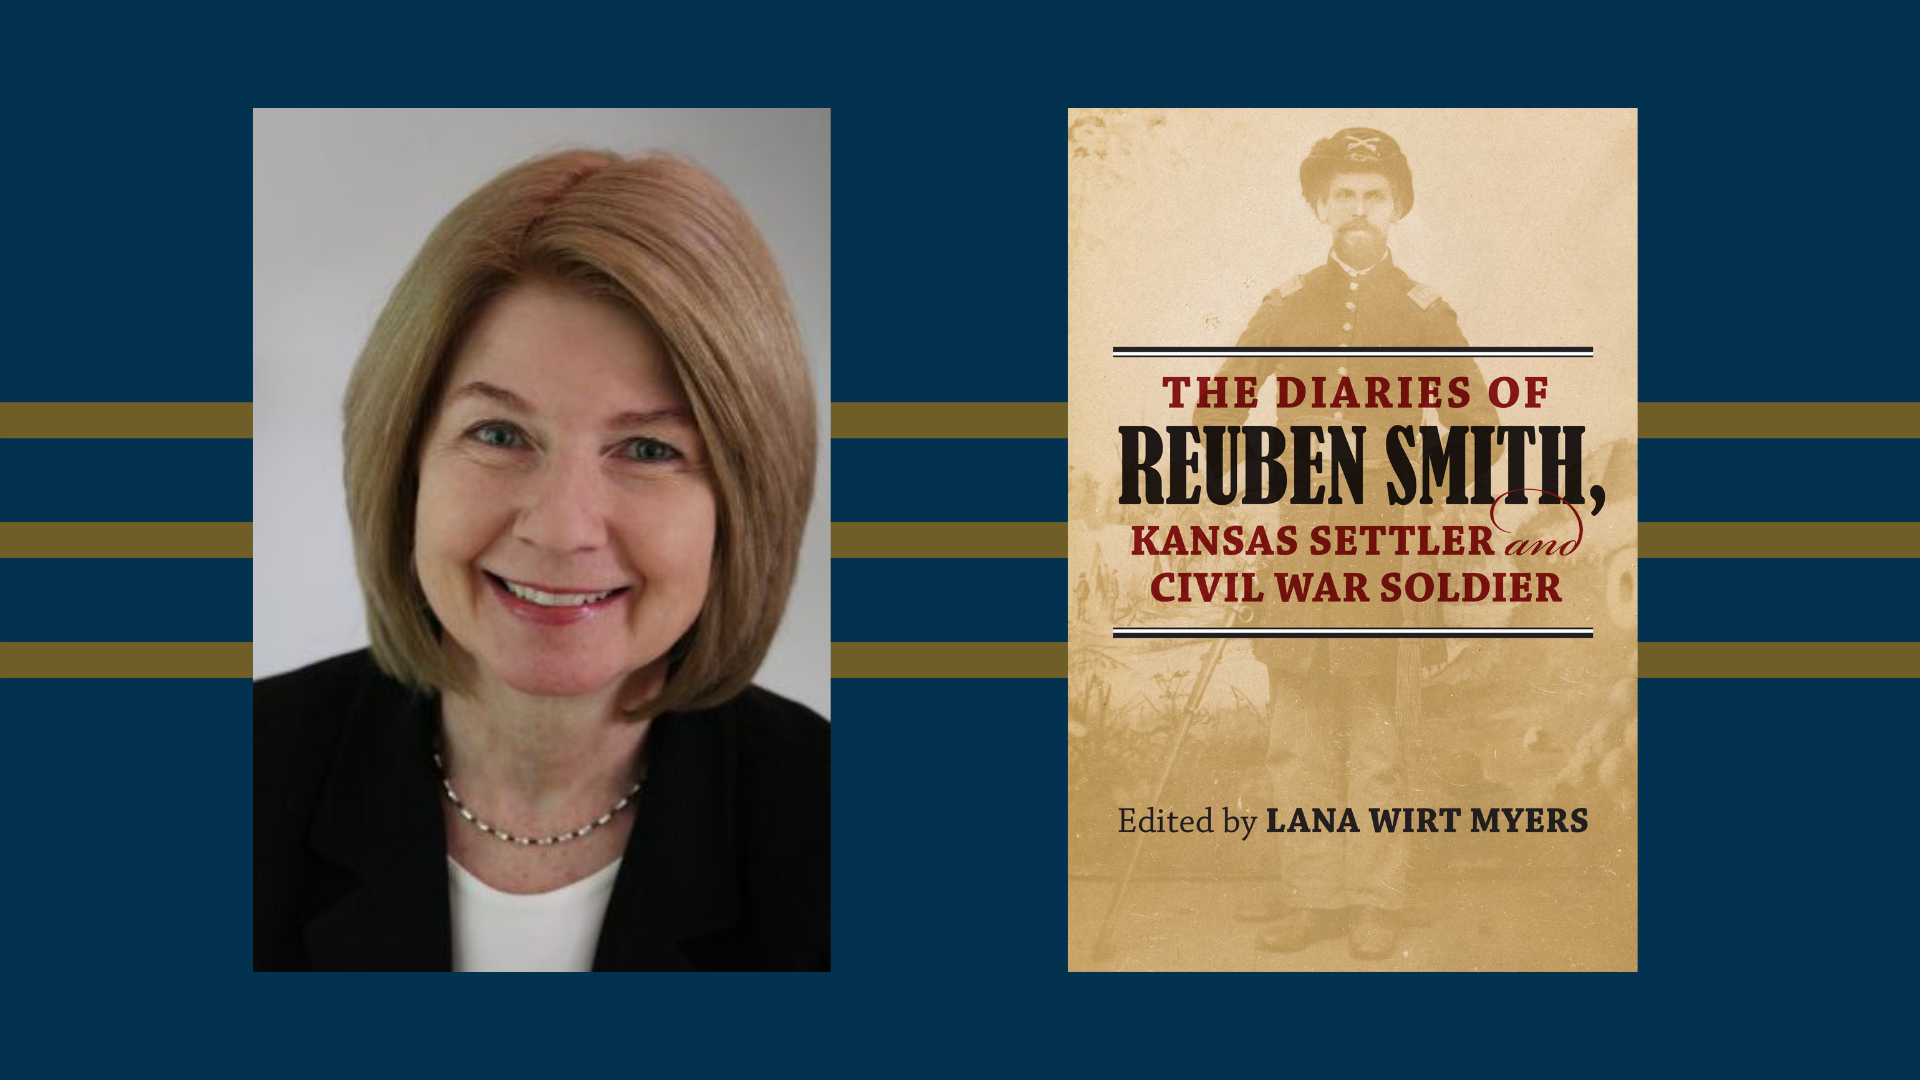 Lana Wirt Myers, author of The Diaries of Reuben Smith, Kansas Settler and Civil War Soldier